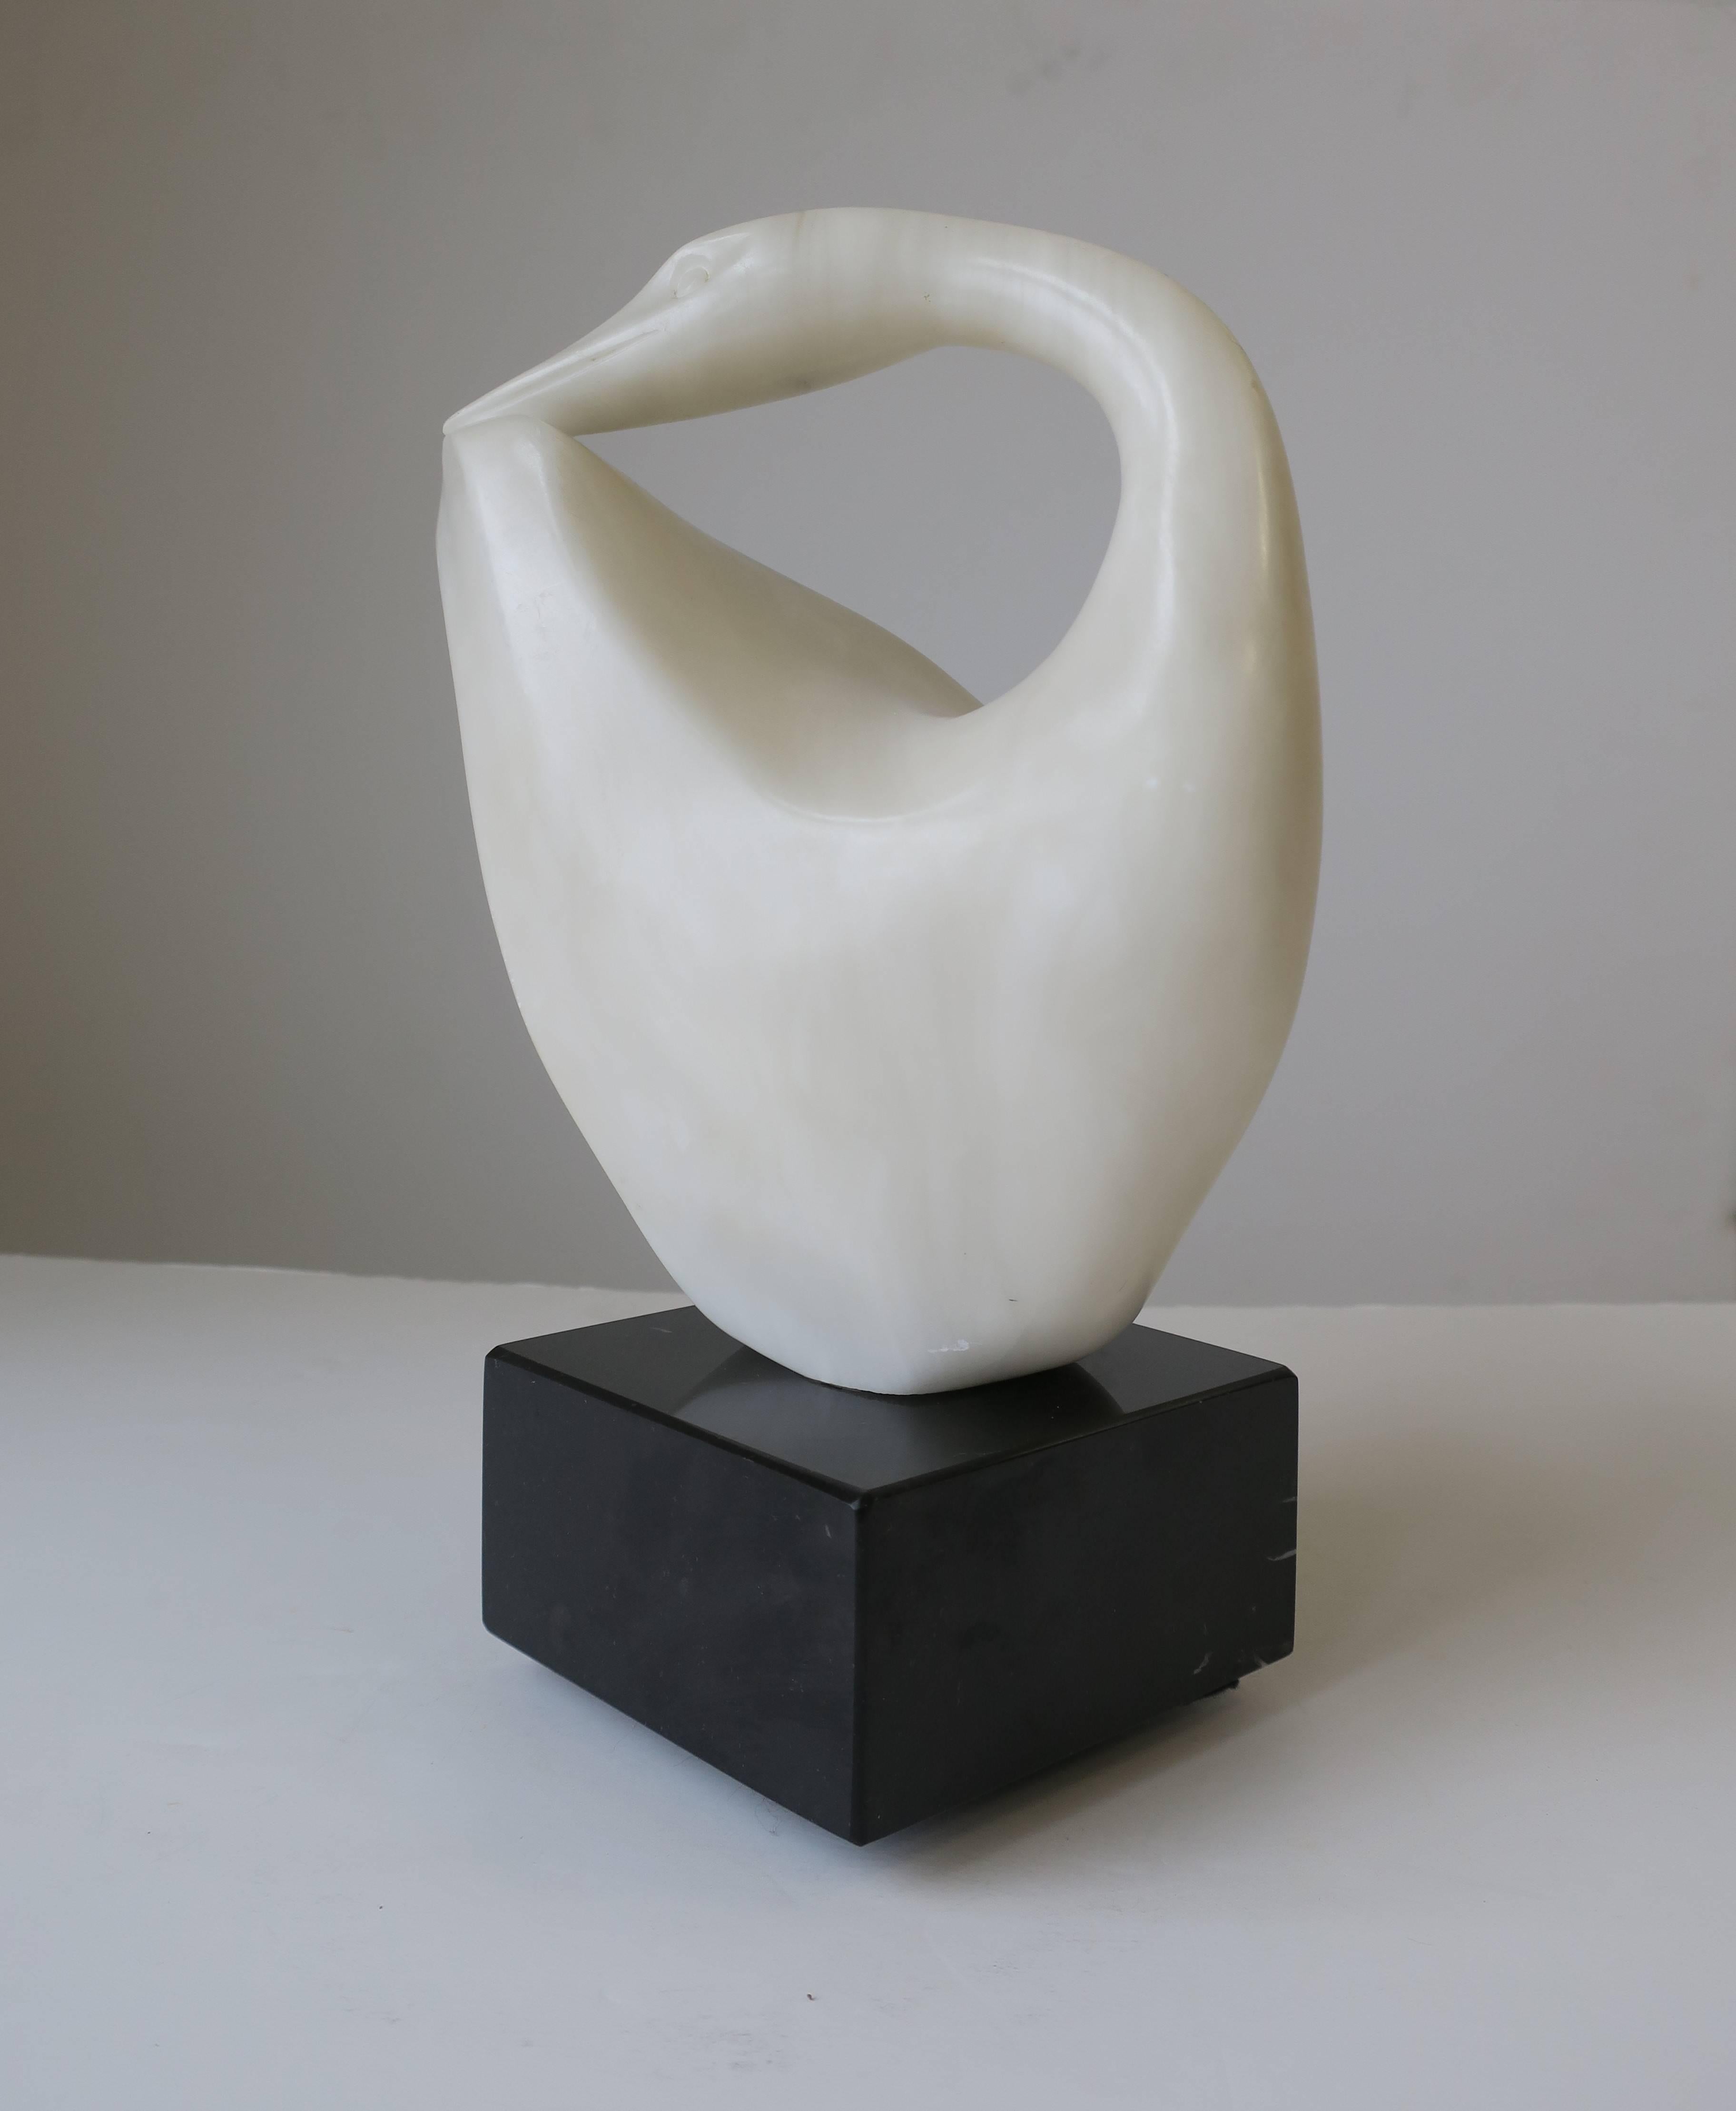 Late 20th Century Black and White Marble Bird Sculpture, ca. 1980s